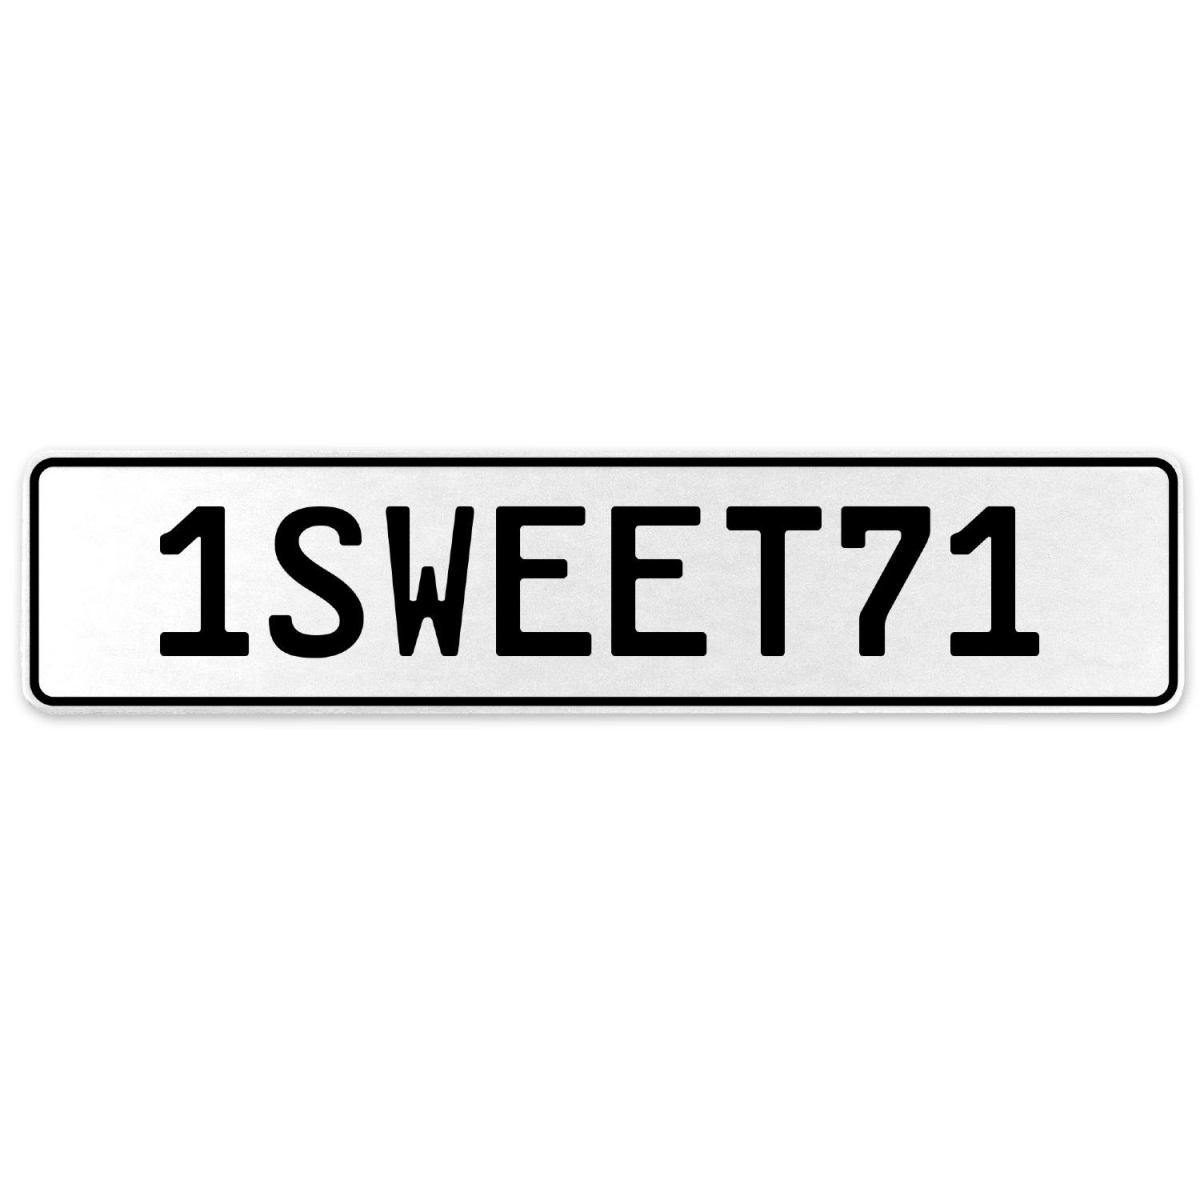 554272 1sweet71 - White Aluminum Street Sign Mancave Euro Plate Name Door Sign Wall